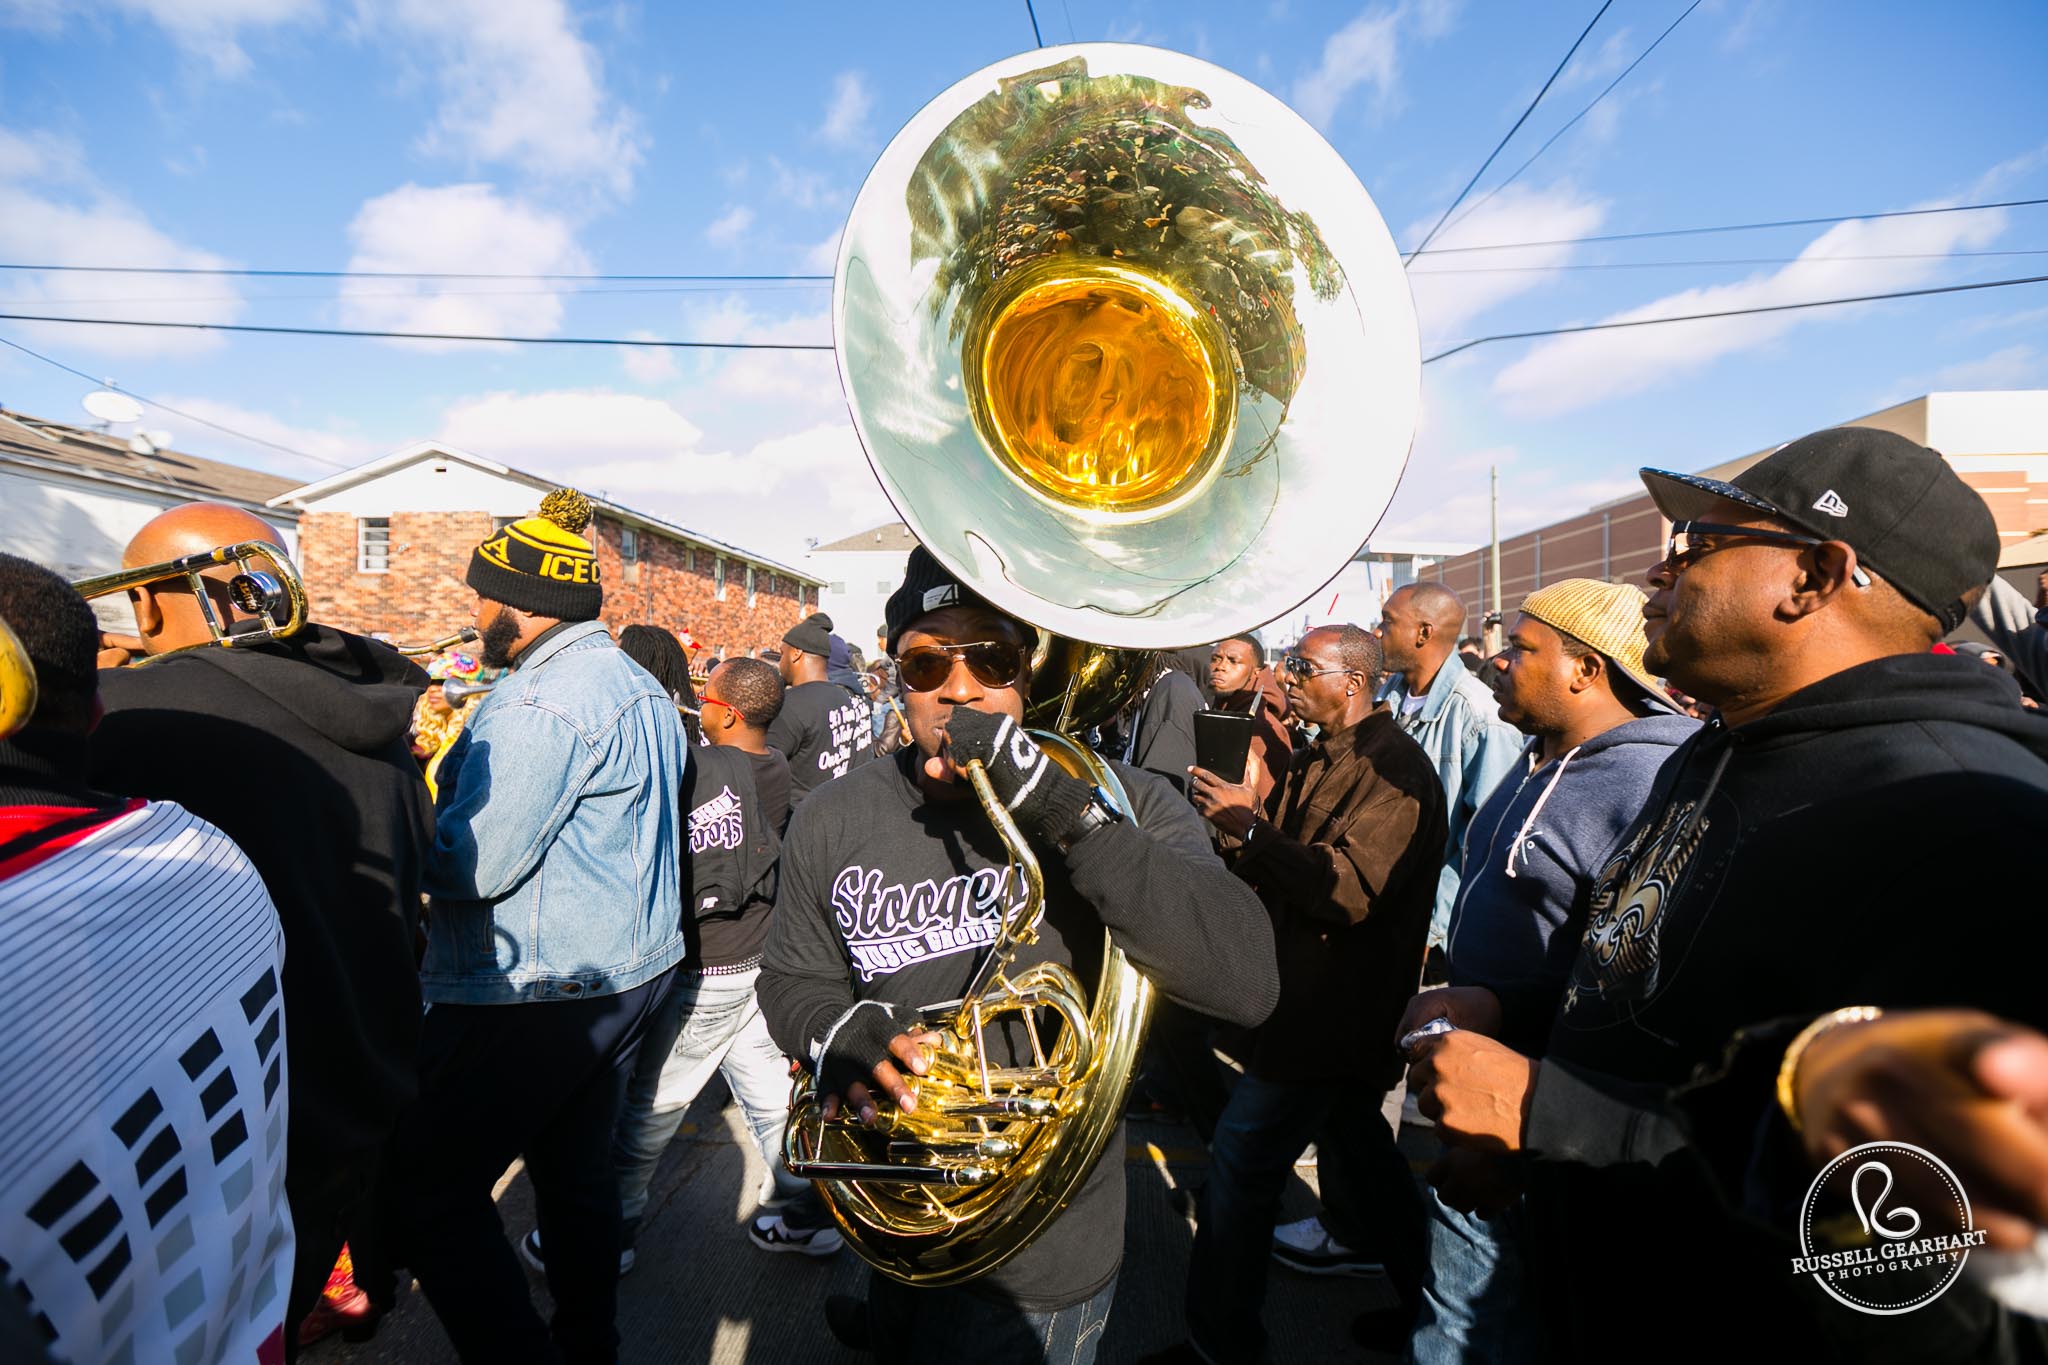 Lady Jetsetters Second Line Parade - New Orleans Honeymoon – Russell Gearhart Photography – www.gearhartphoto.com